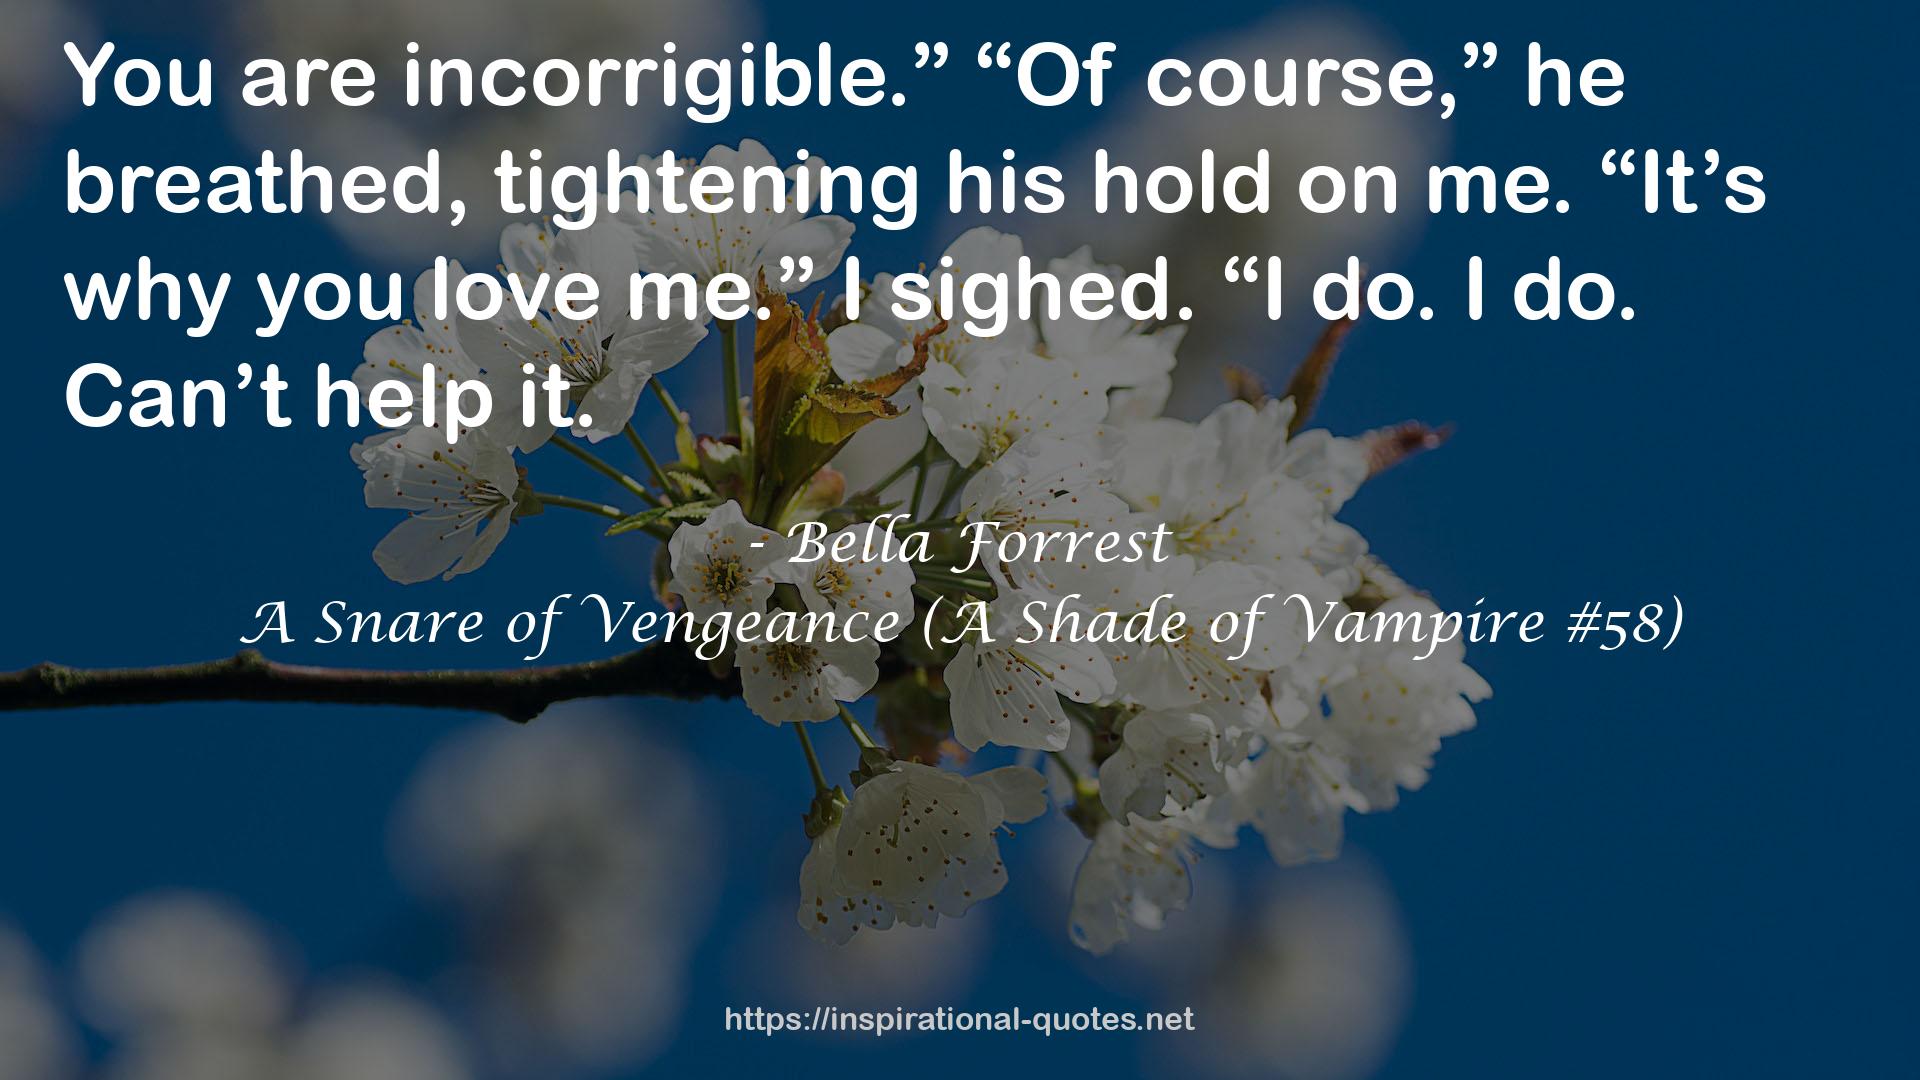 A Snare of Vengeance (A Shade of Vampire #58) QUOTES